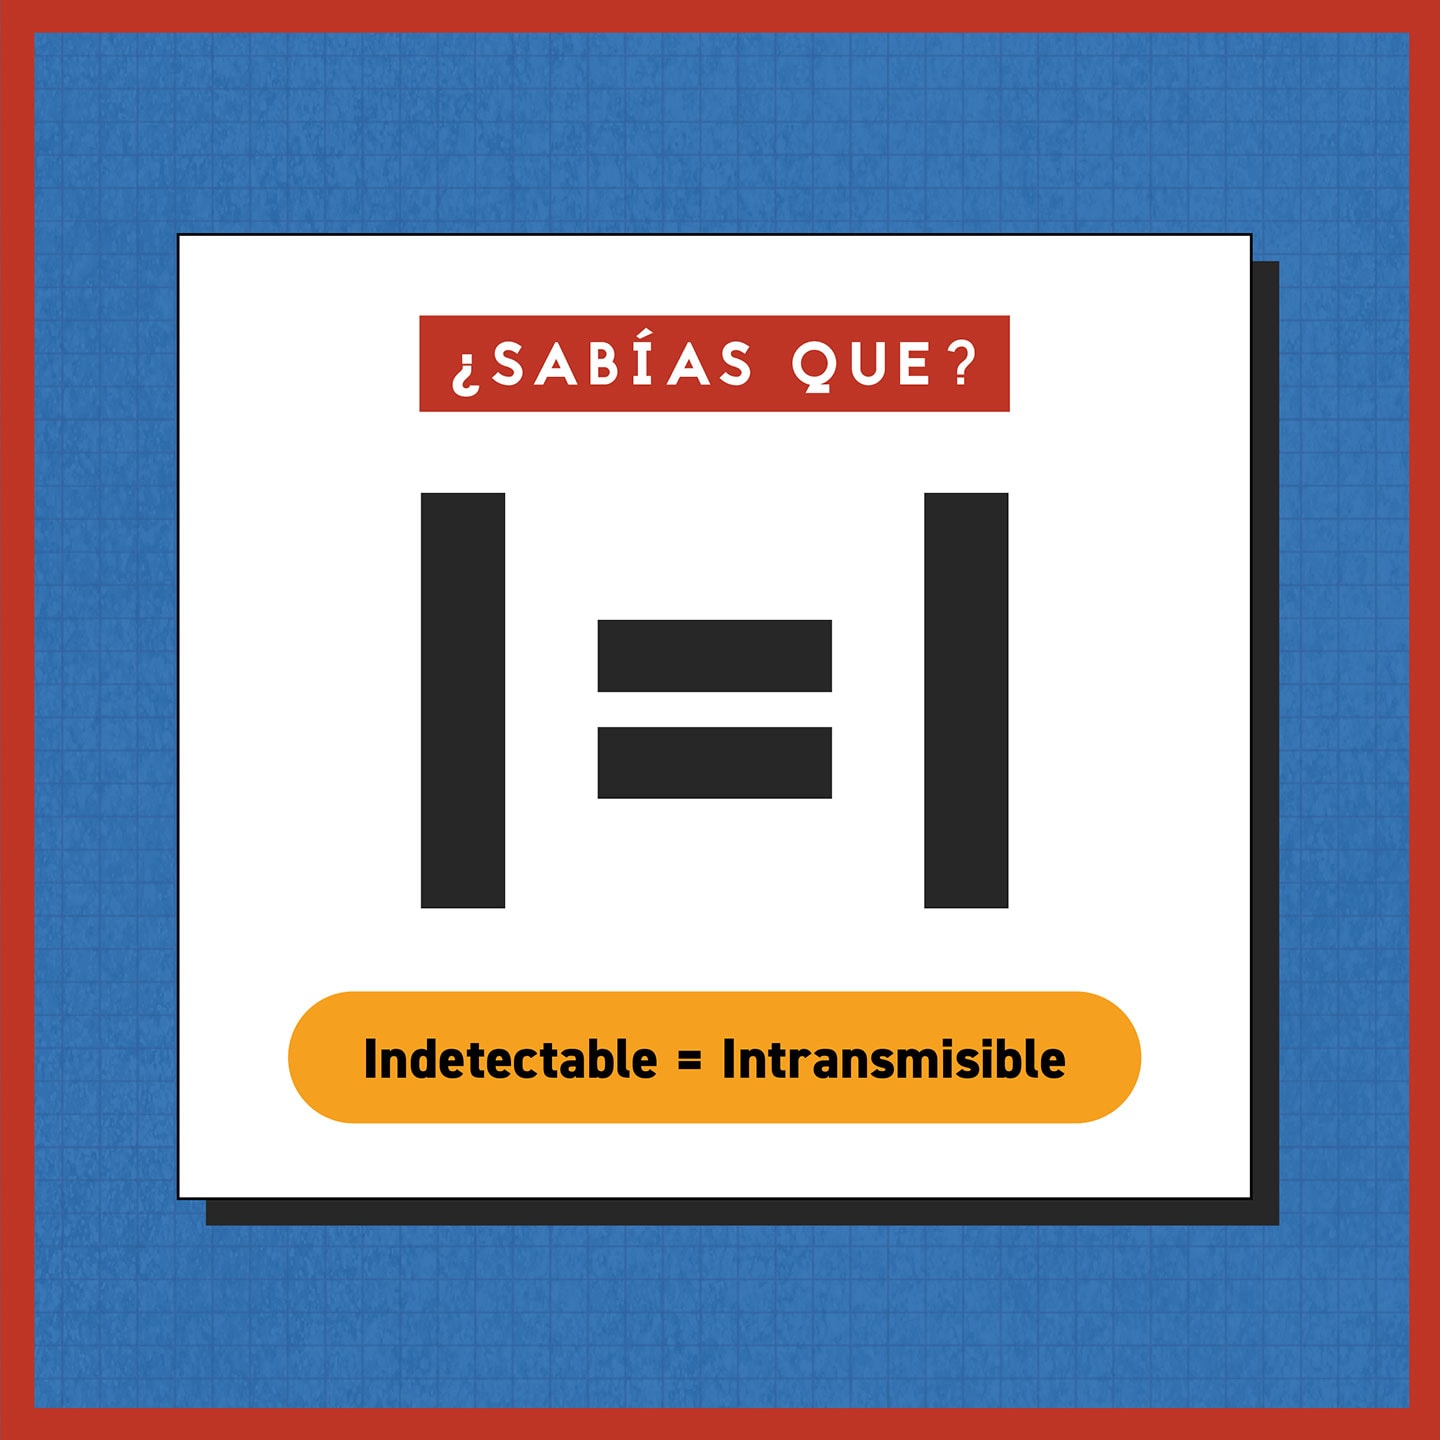 ¿Sabías que? I = I. Indetectable = Intransmisible.